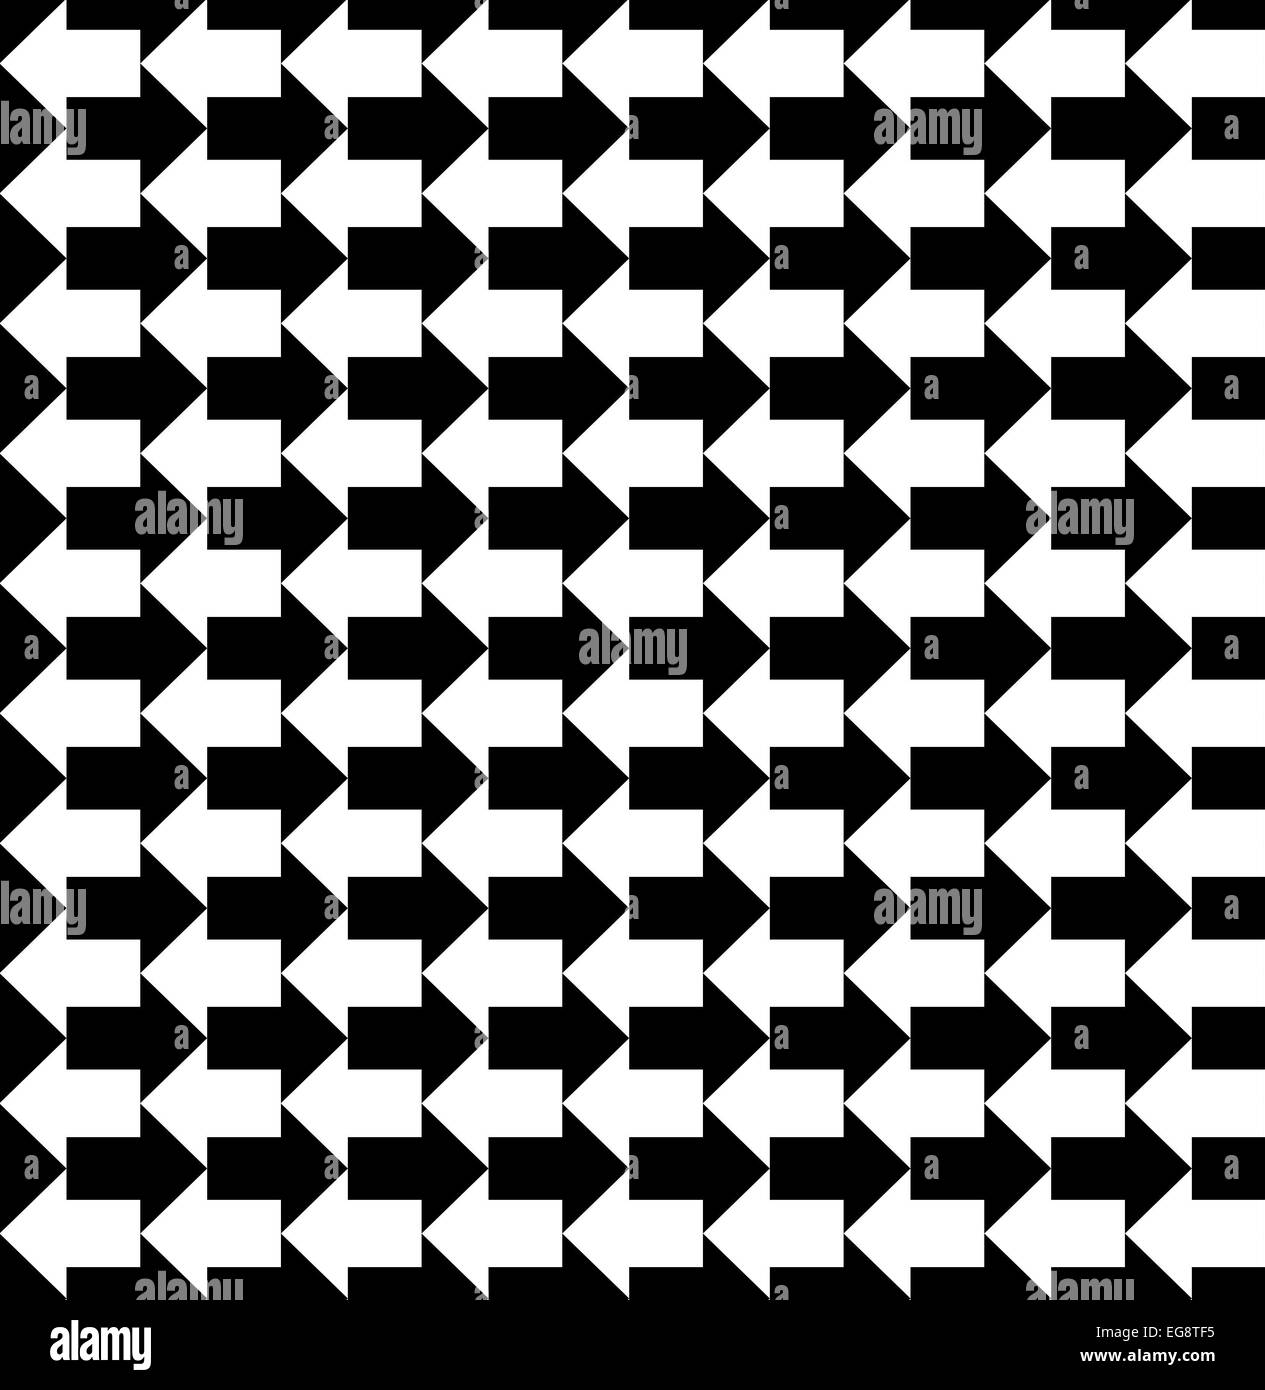 Black and white arrows pointing to opposite directions, a seamless pattern Stock Photo